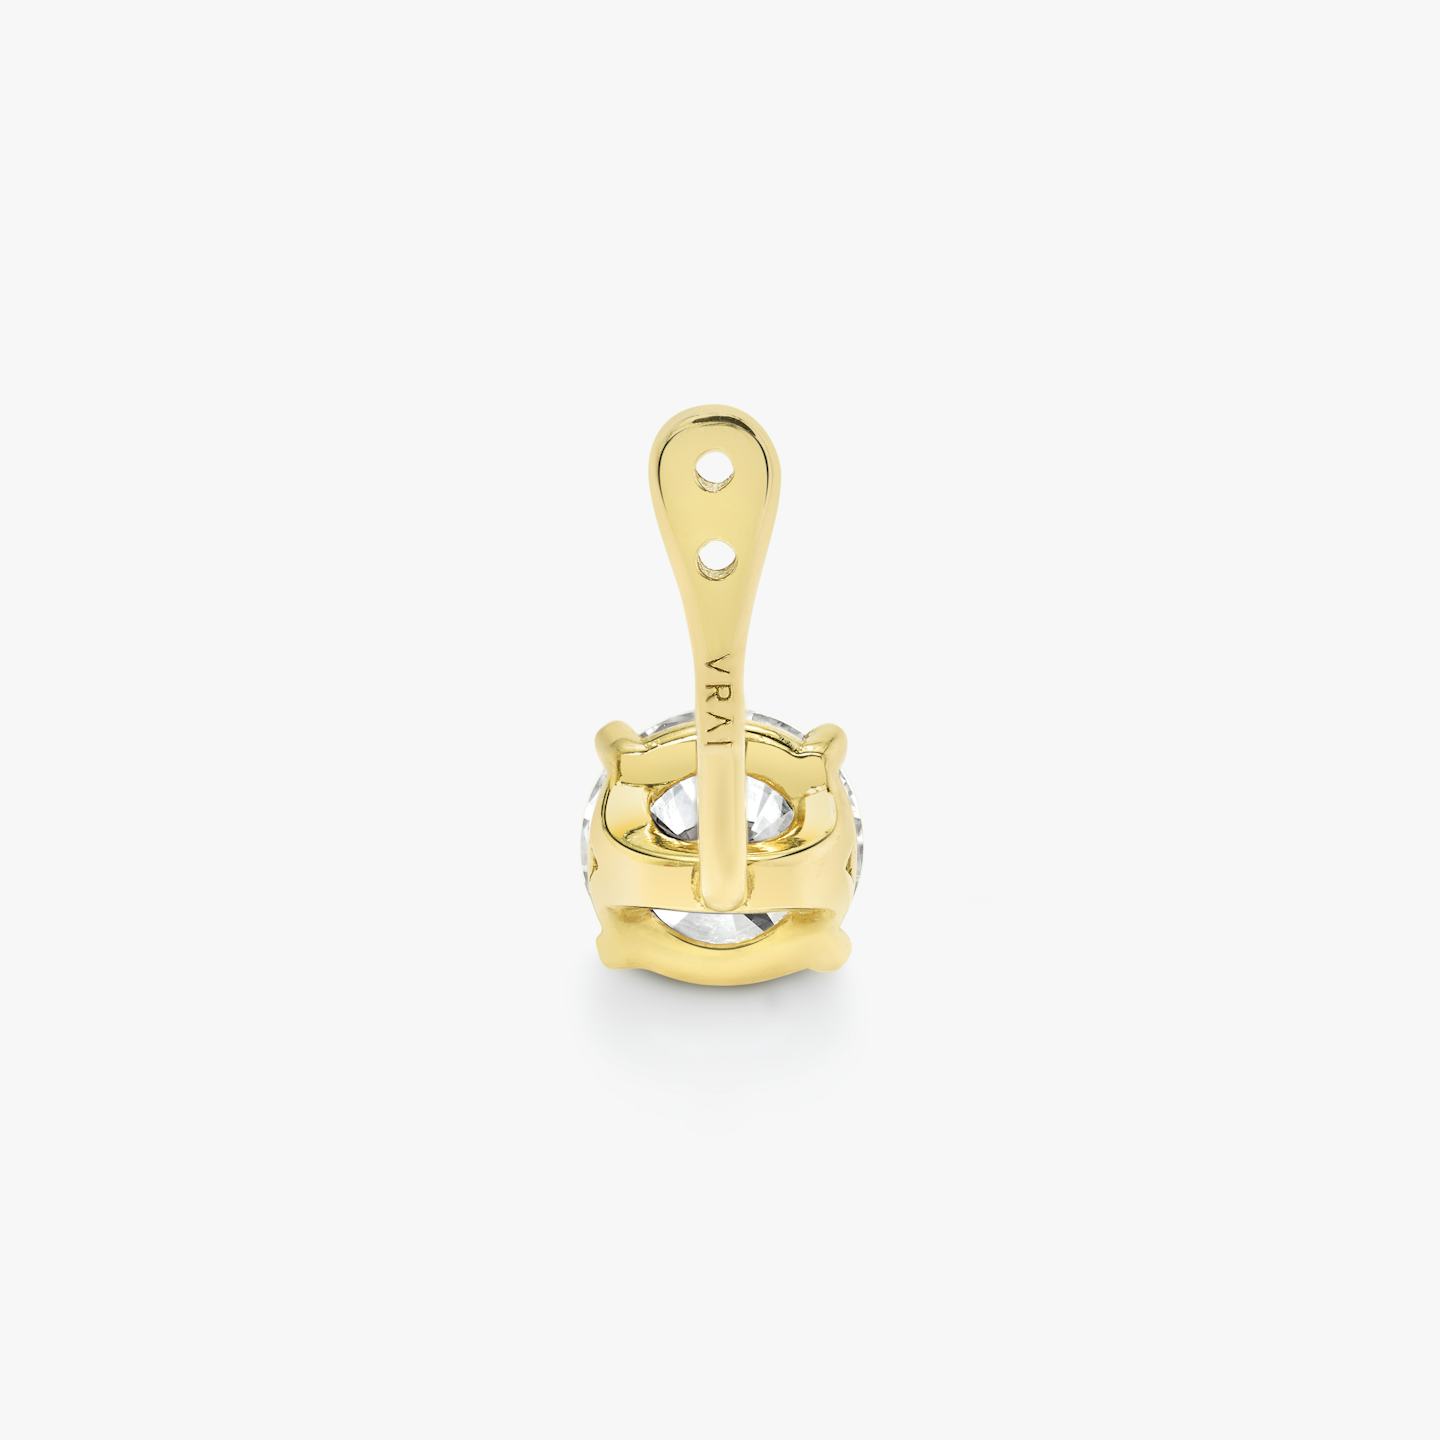 VRAI Solitaire Drop Ear Jacket | Round Brilliant | 14k | 18k Yellow Gold | Carat weight: 1/2